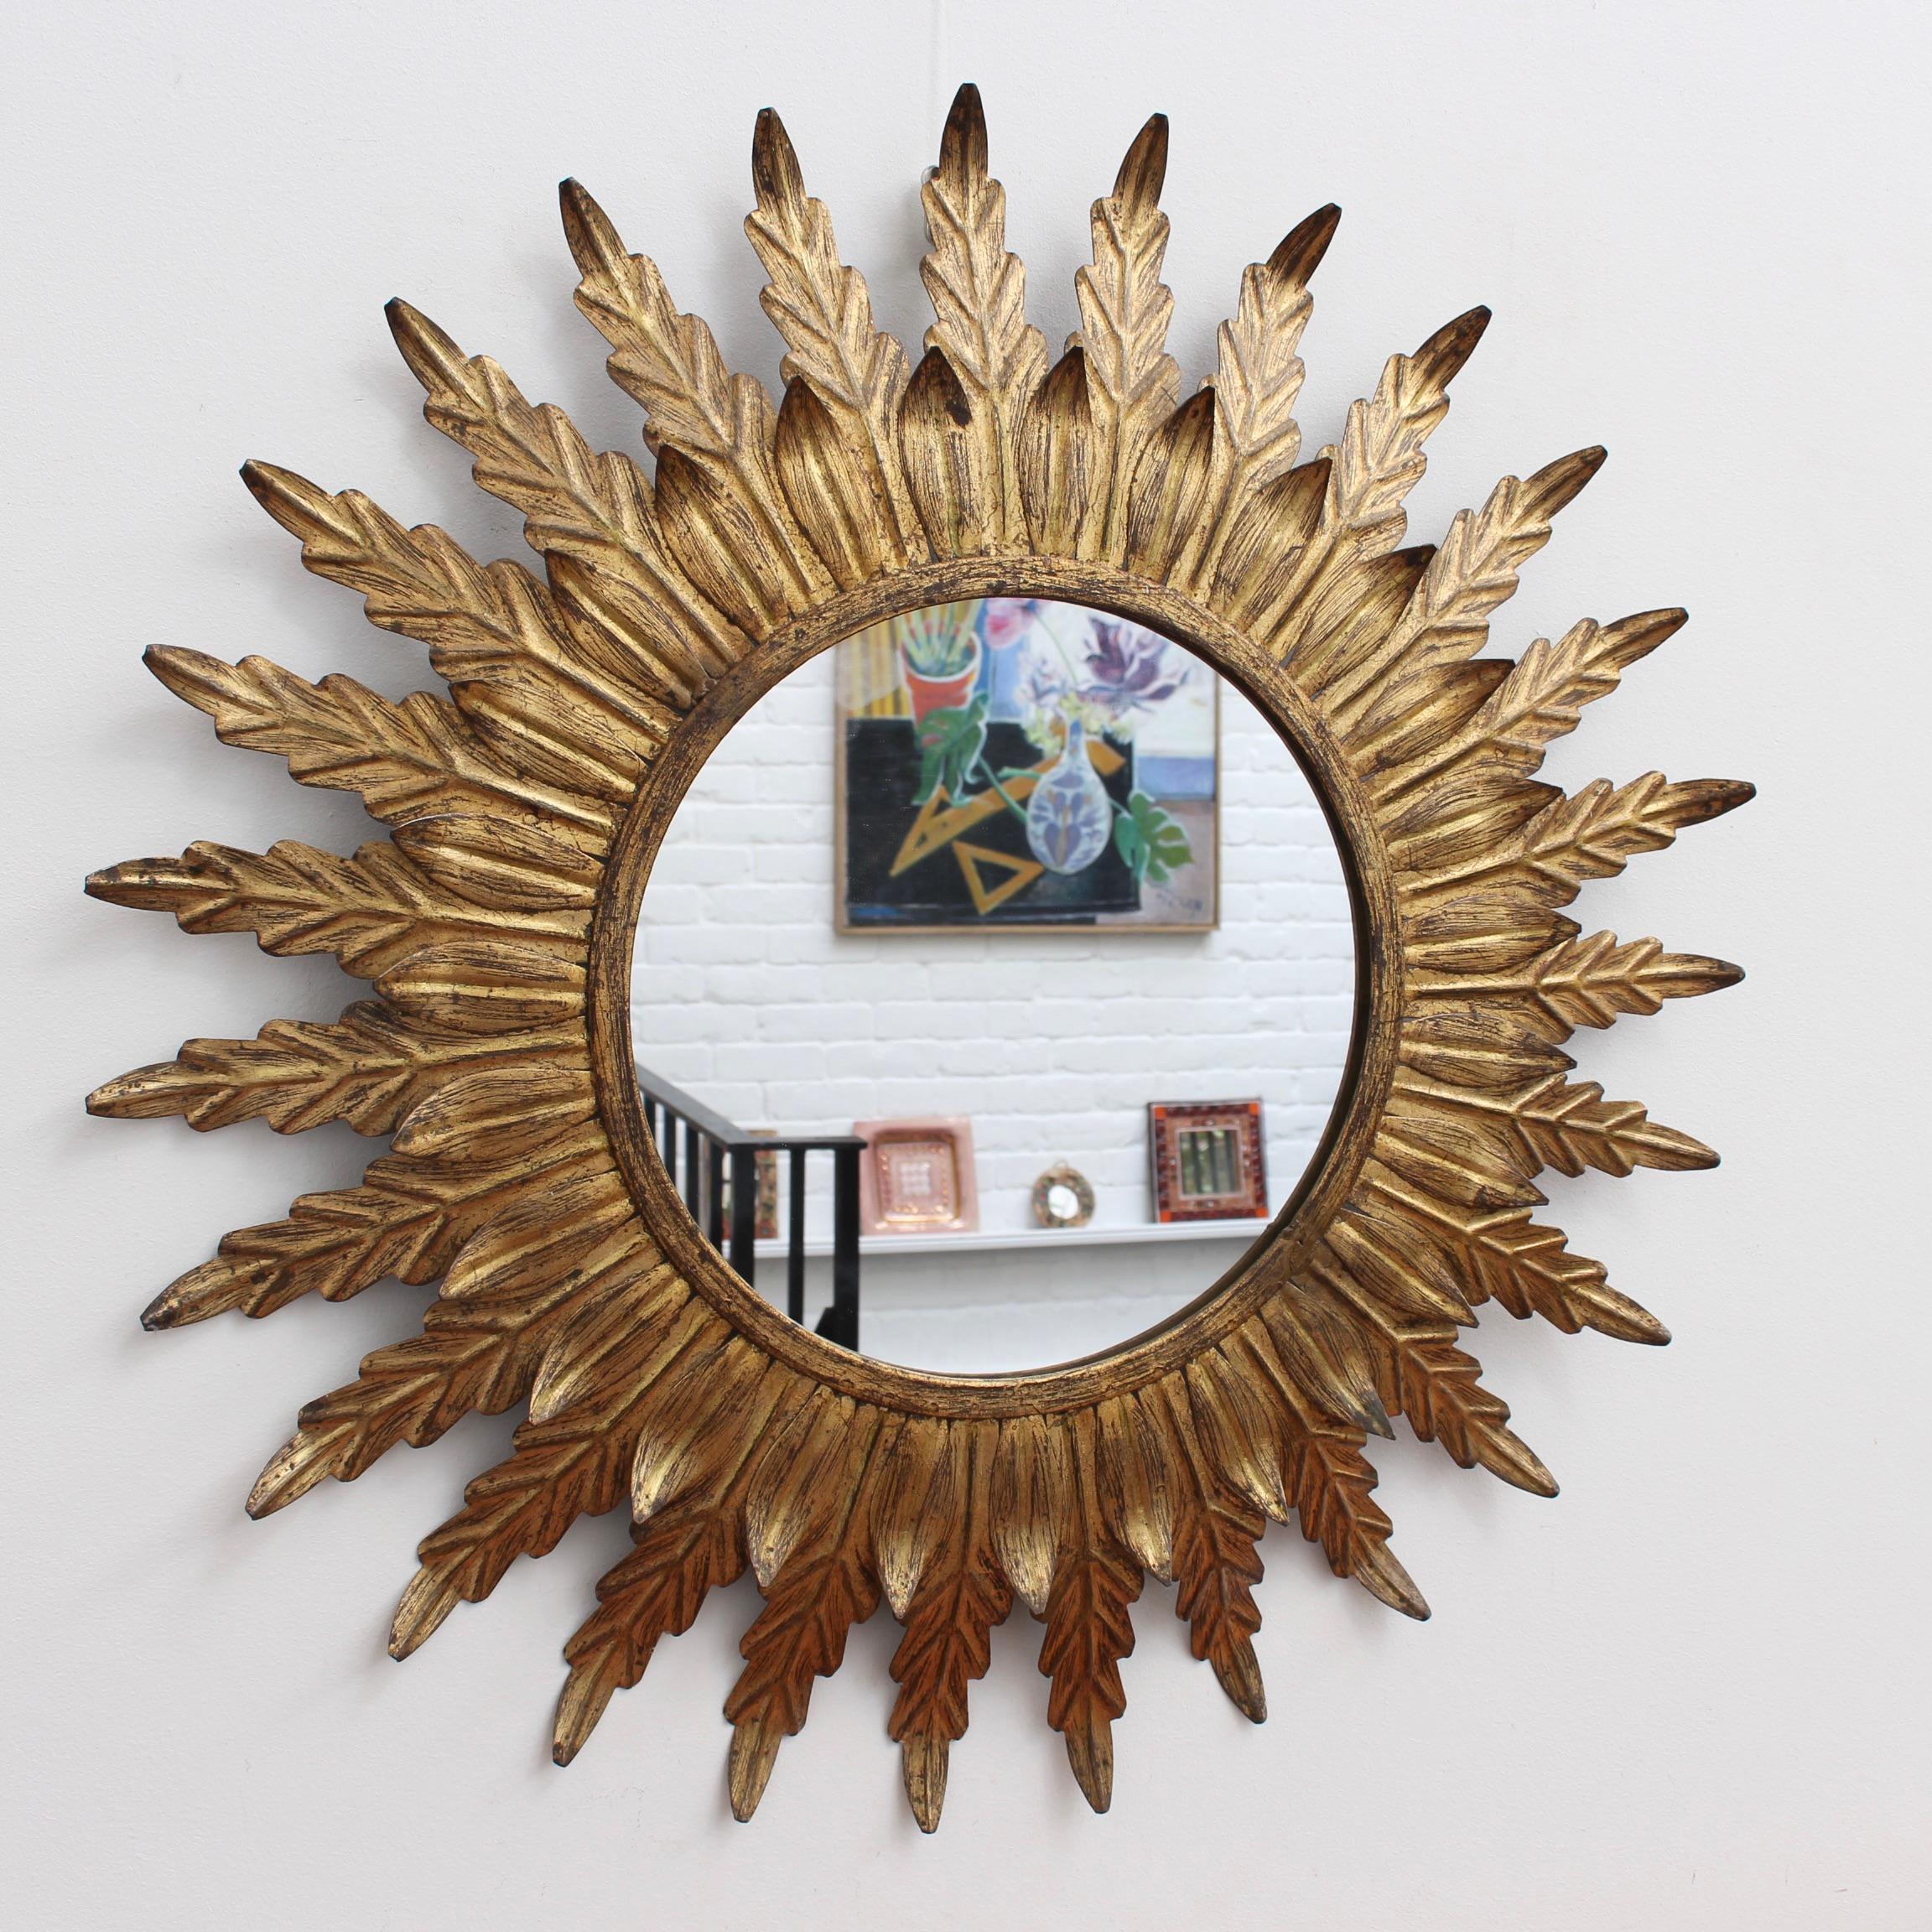 Spanish gilt metal sunburst mirror (circa 1960s) with leaf motif rays emanating from the glass border. In fair vintage condition commensurate with age and use. Some authentic age spots and characterful markings appear on gilt surface and underside